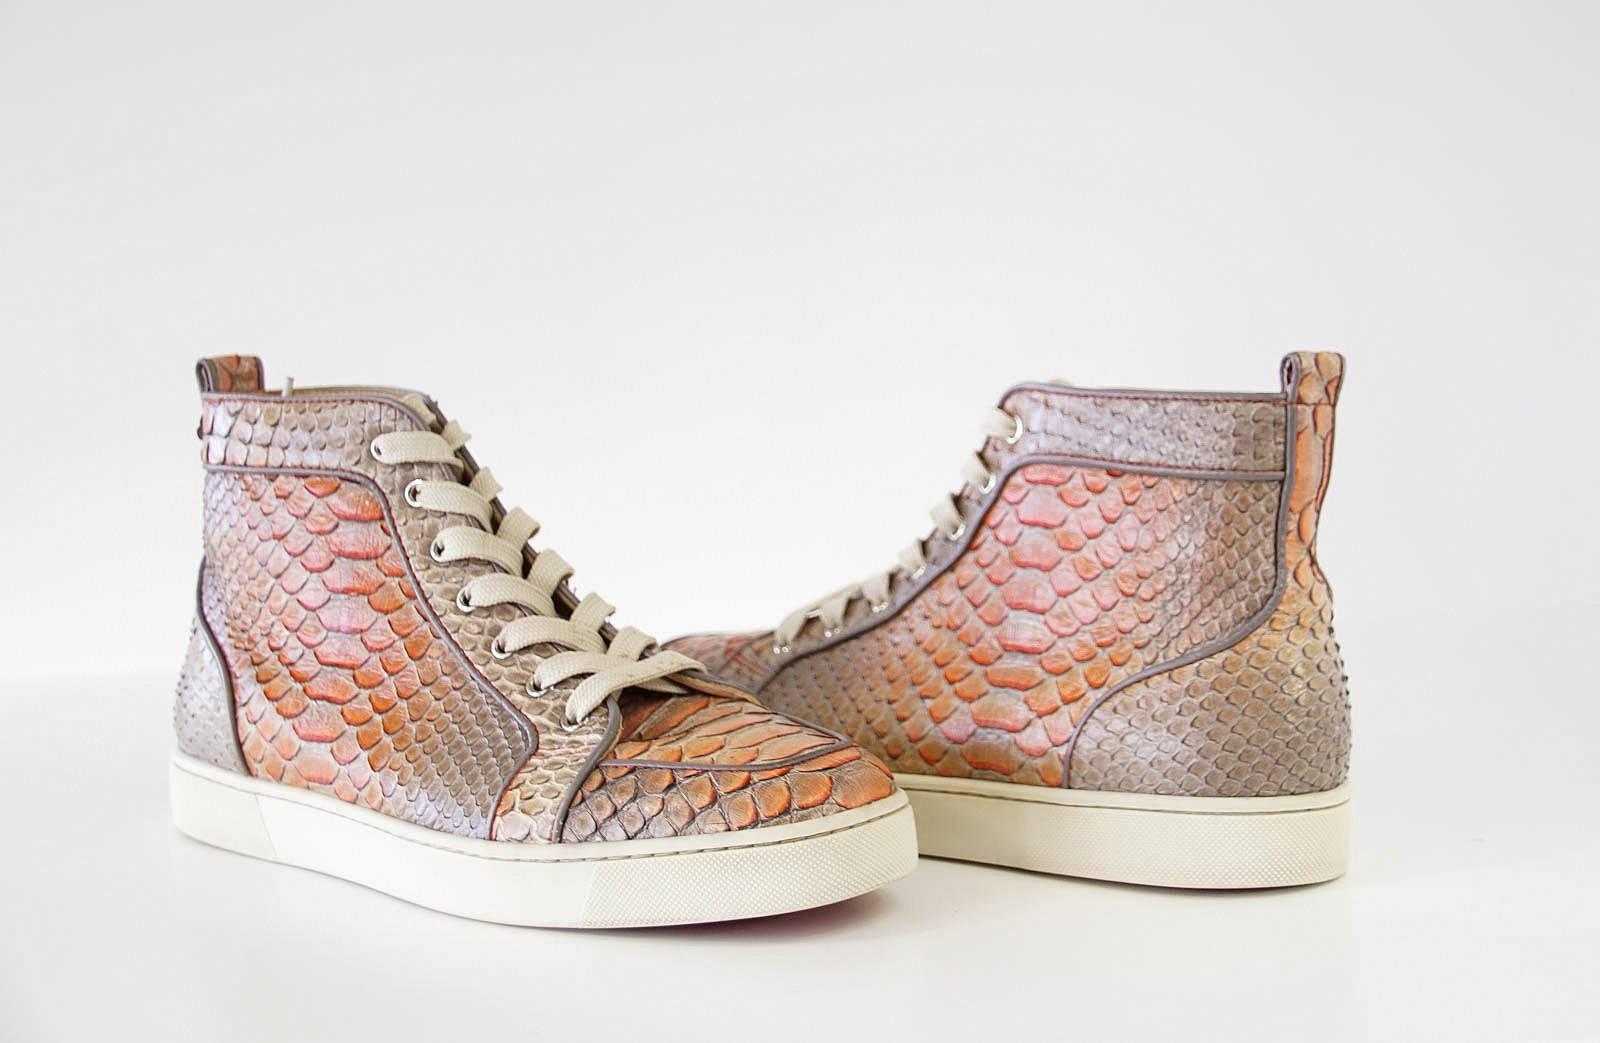 Guaranteed authentic CHRISTIAN LOUBOUTIN men's Rantus Orlato Flat Snakeskin Fairy Tale sneaker.
Chic taupe with soft dusty pink toned snakeskin creates this really beautiful sneaker.  Taupe piping trim.
Logo plaque on side of shoe.   
Comes with